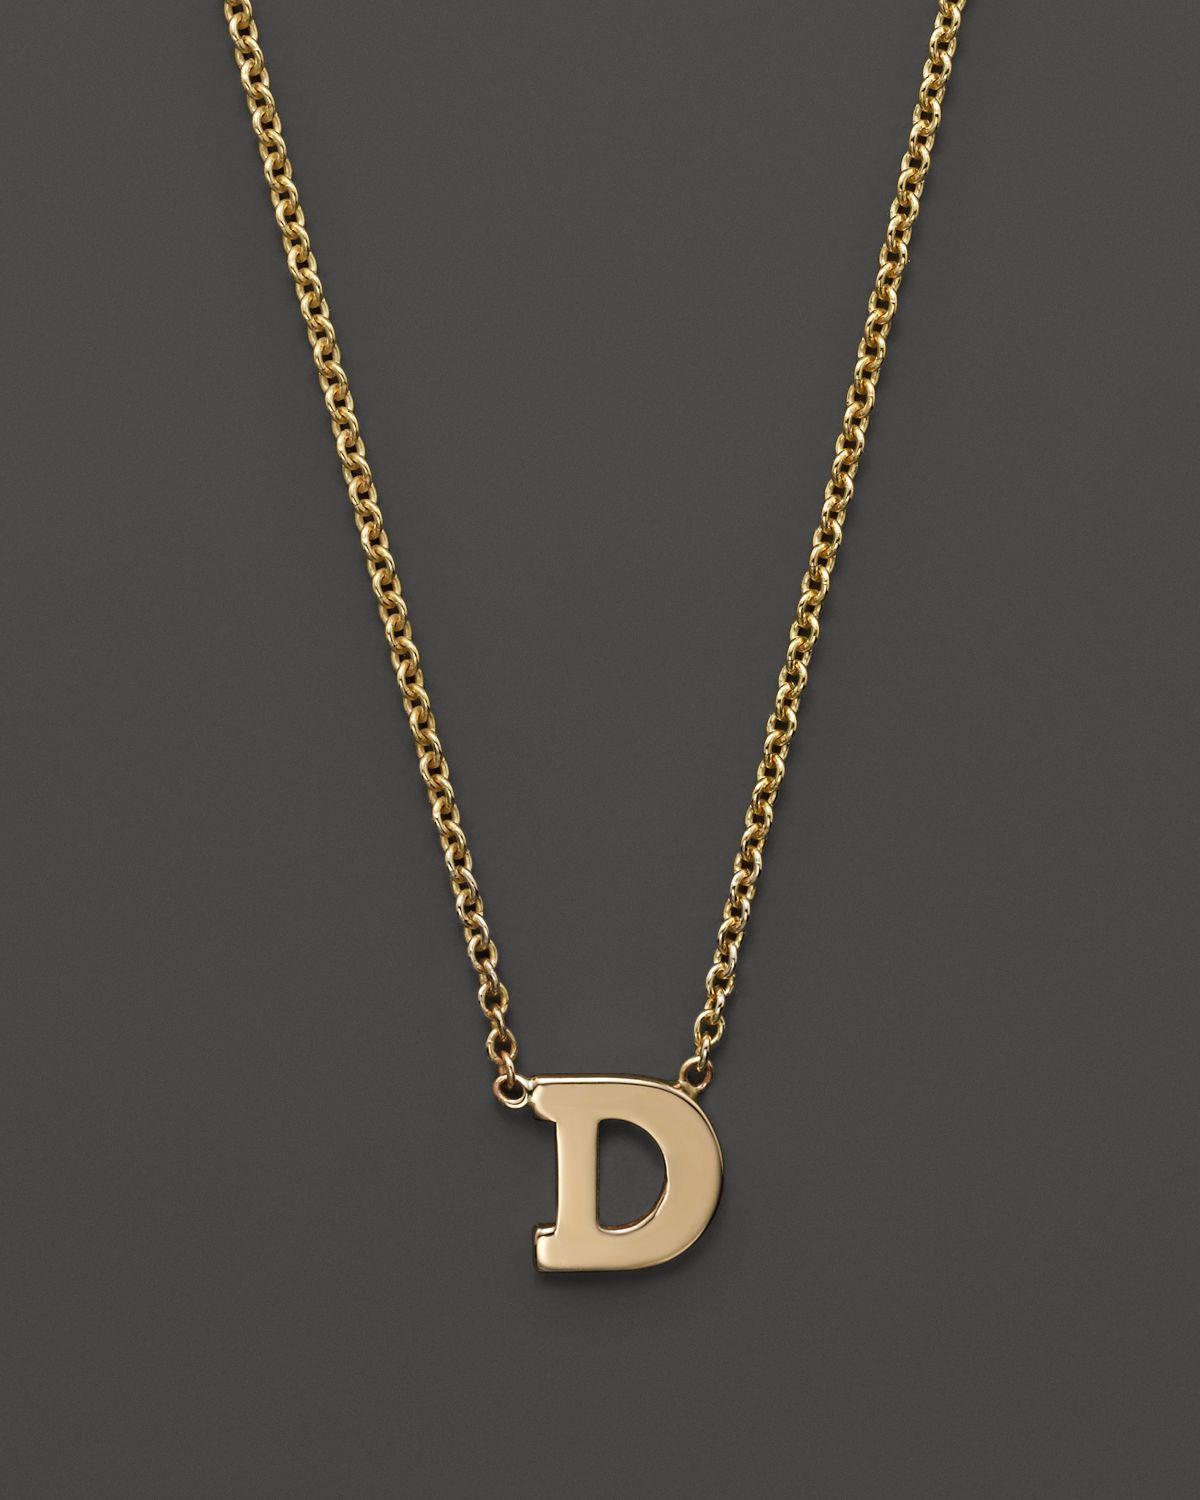 Zoe chicco 14k Yellow Gold Initial Necklace, 16